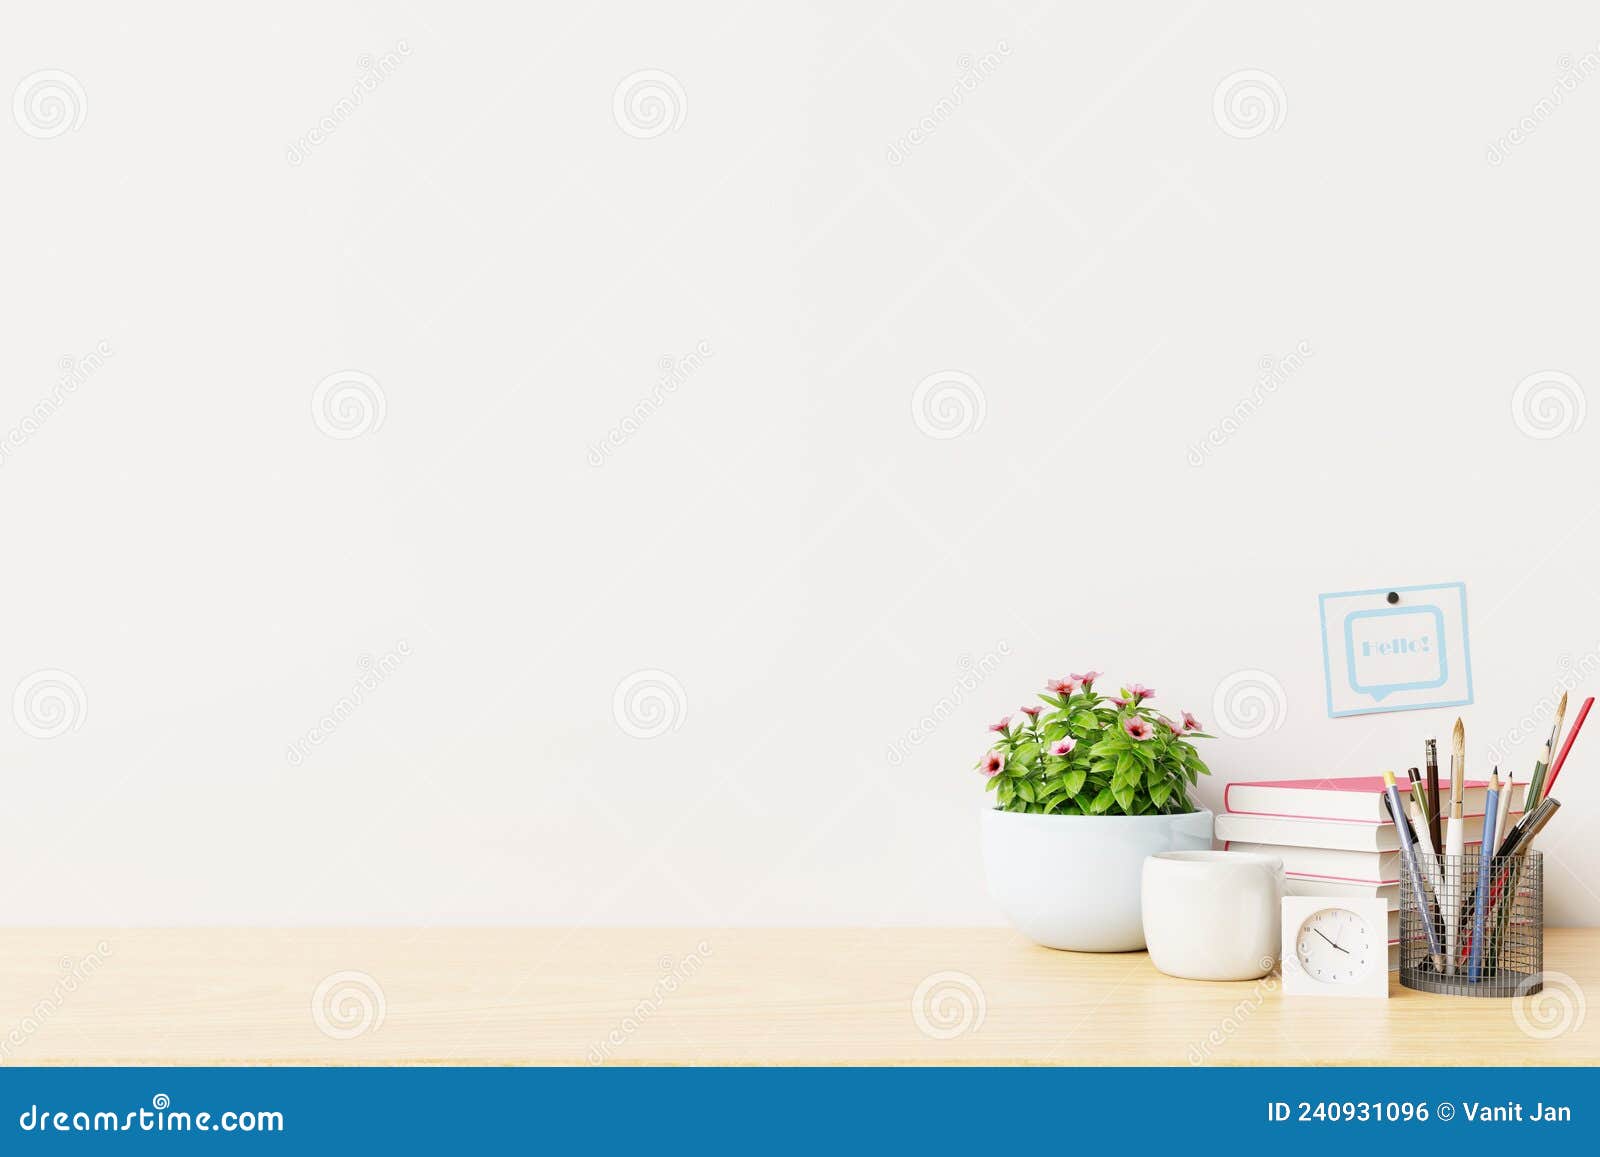 Workspace Office Table and Work Space Concept Stock Illustration ...